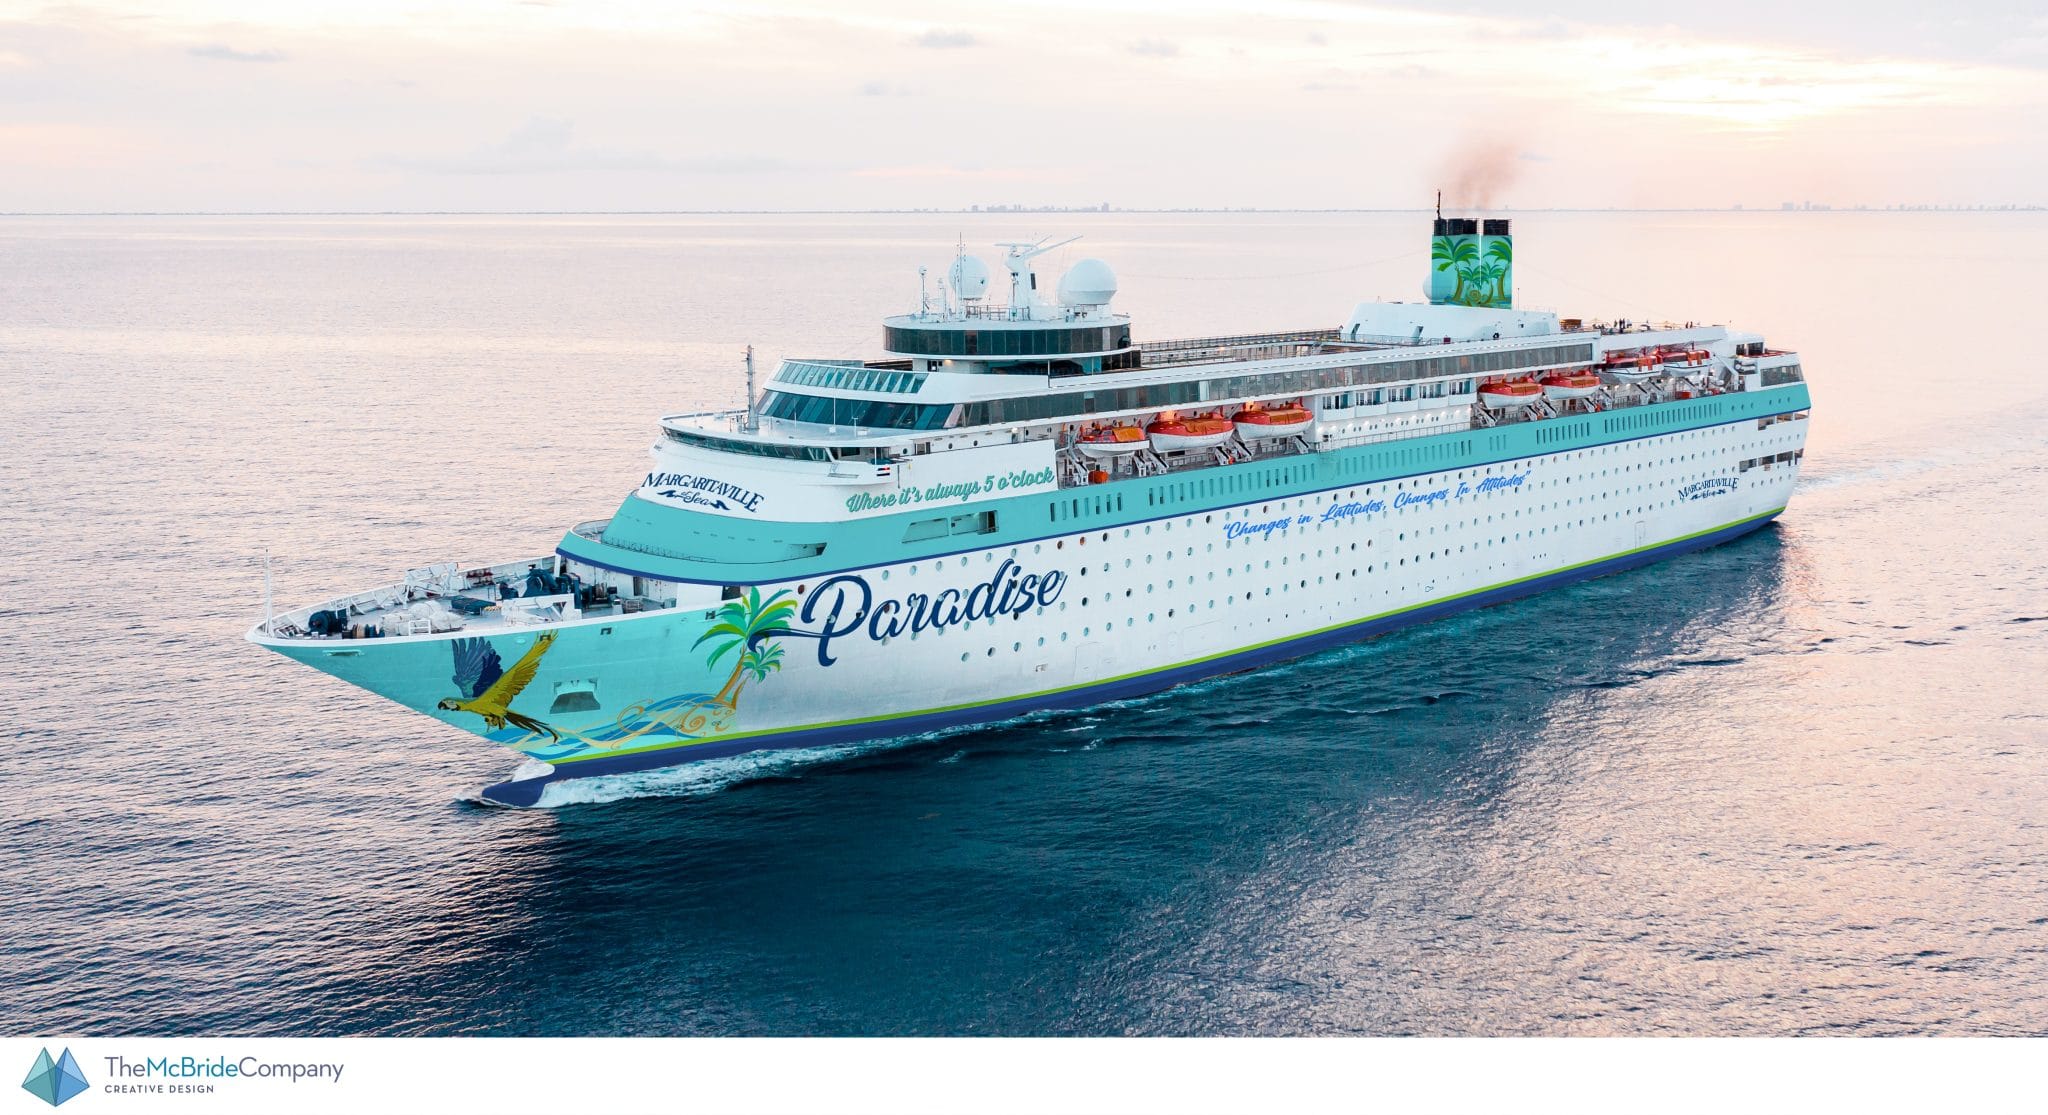 First Margaritaville Cruise Ship Will Sail From Florida